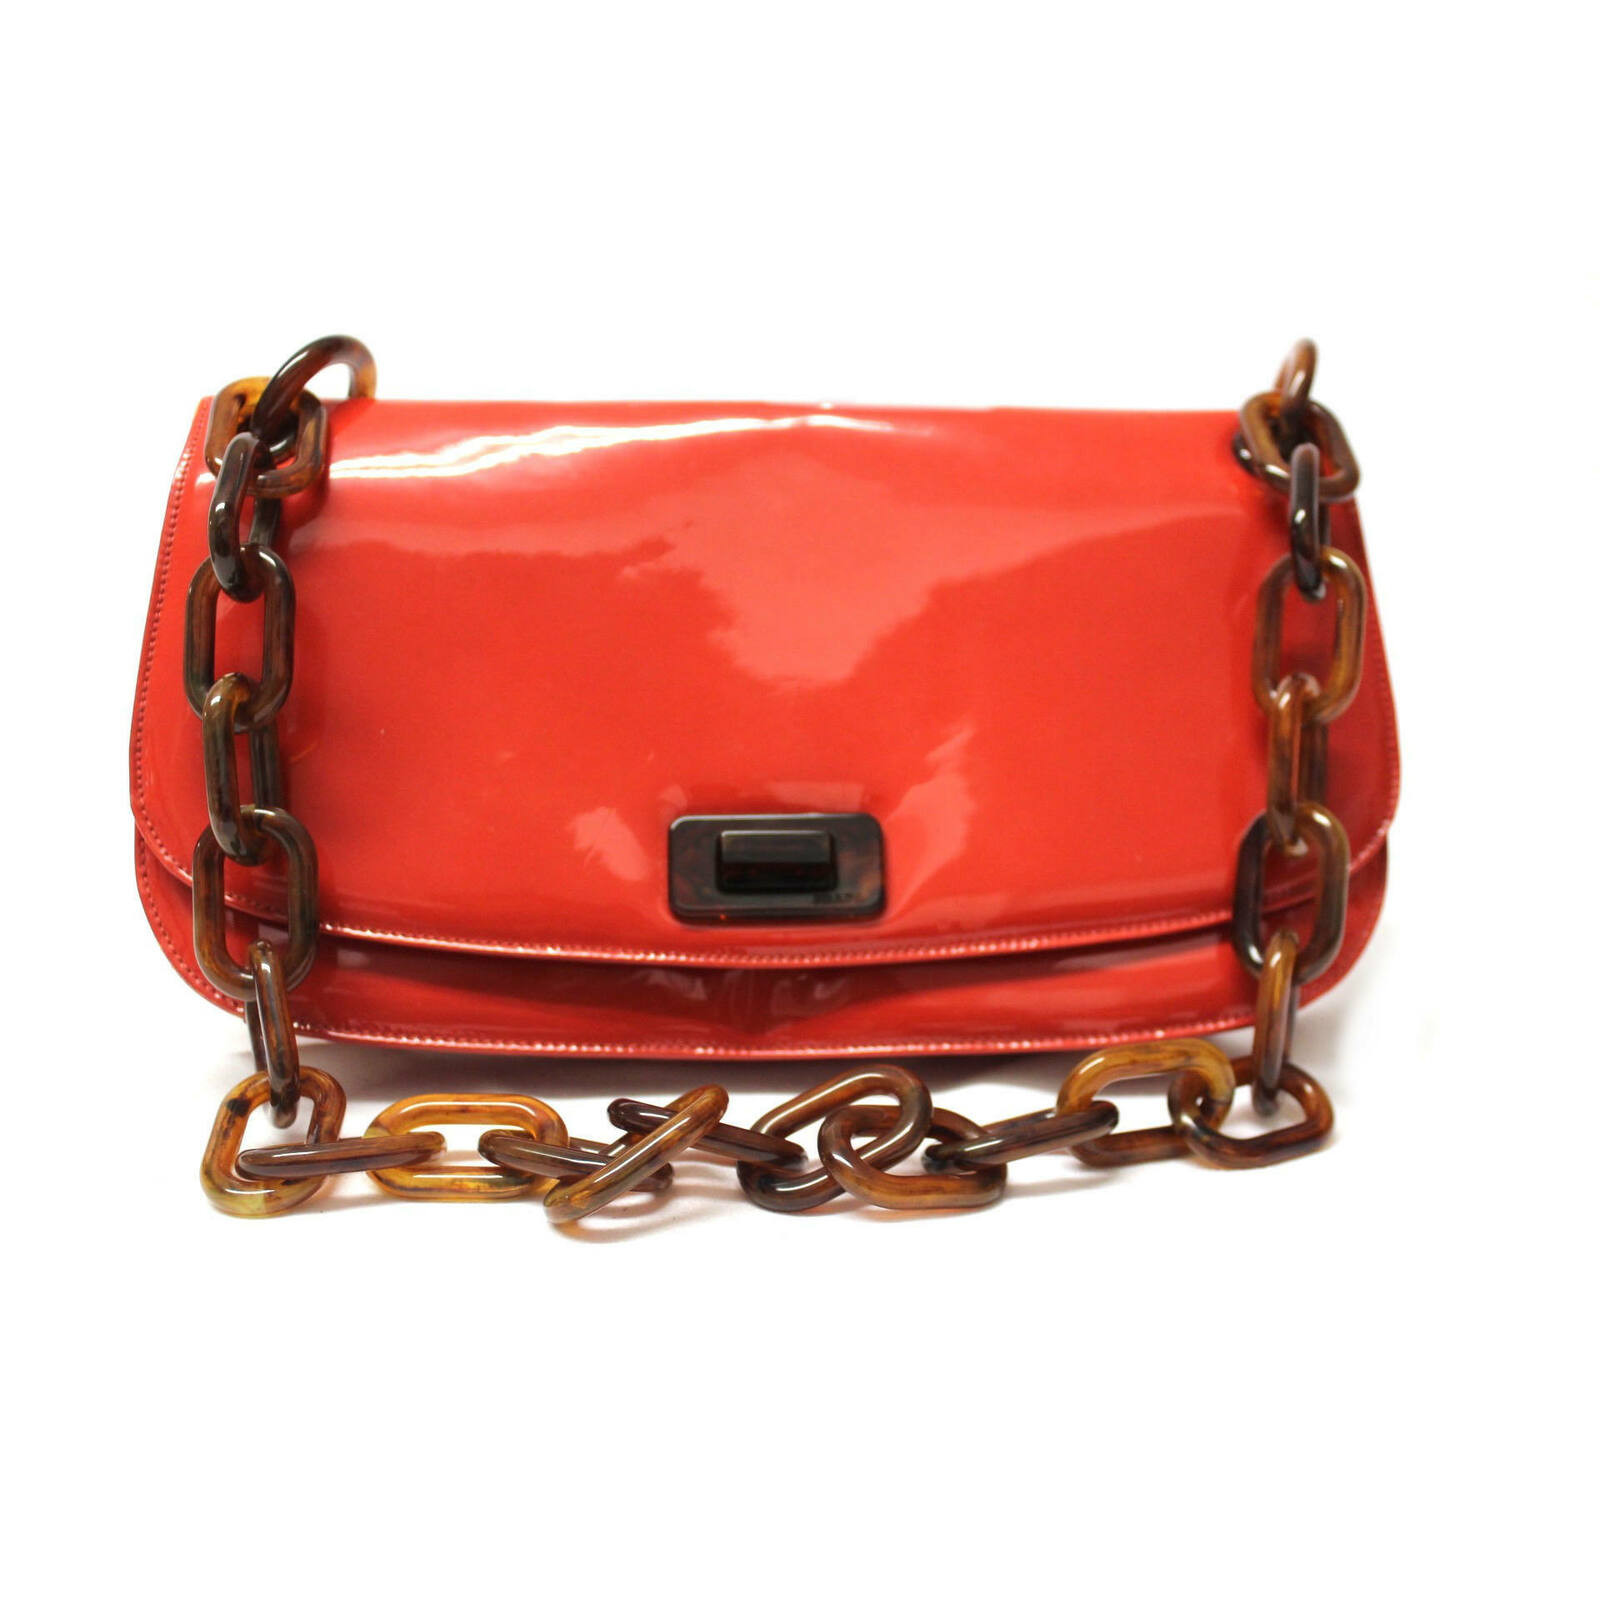 Prada Clutch Bag Patent leather in Red - Second Hand Prada Clutch Bag  Patent leather in Red buy used for 576€ (4485608)